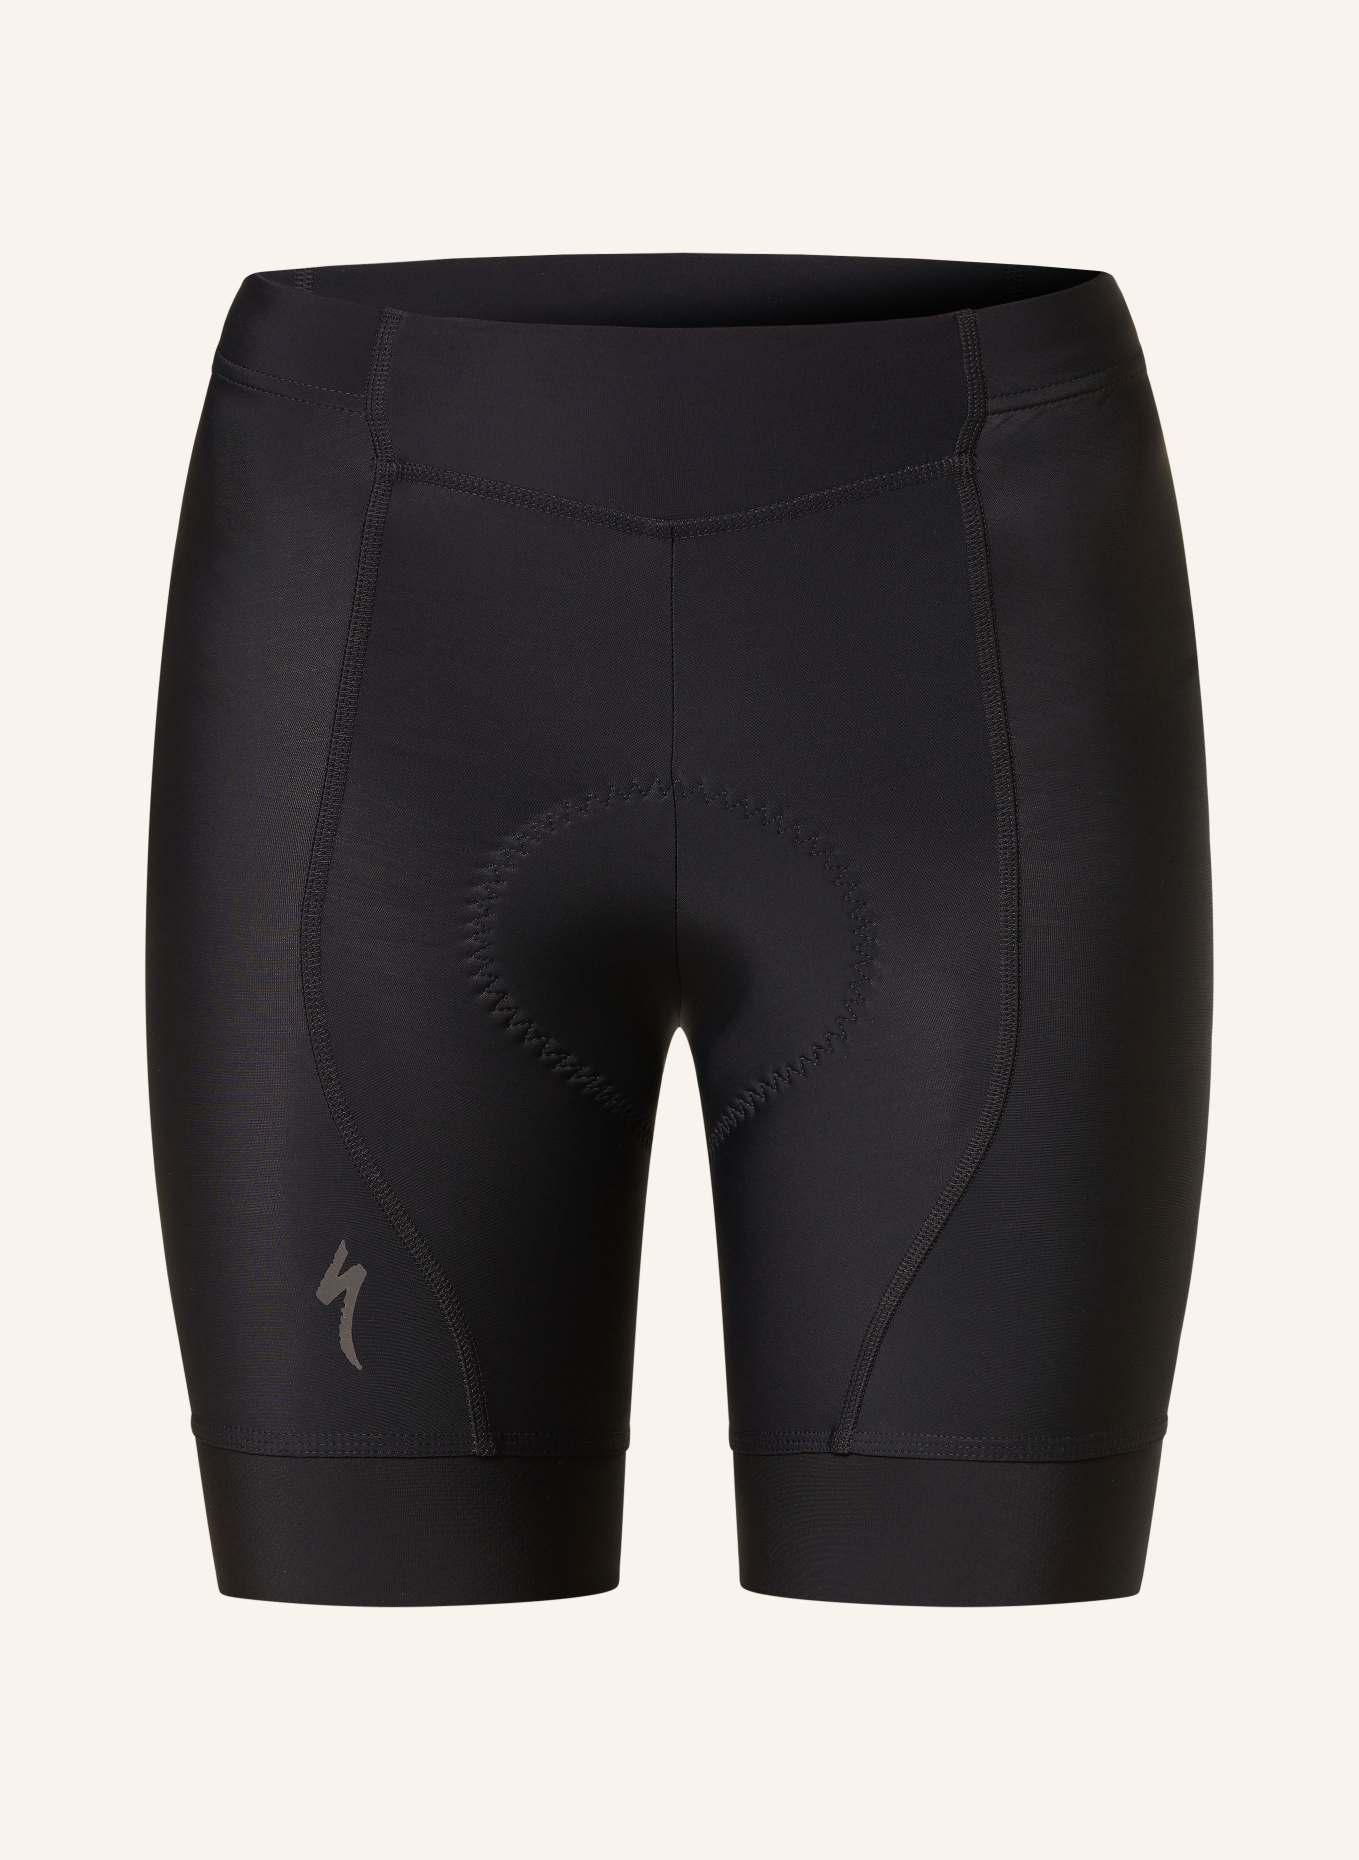 Specialized RBX Cycling Knickers